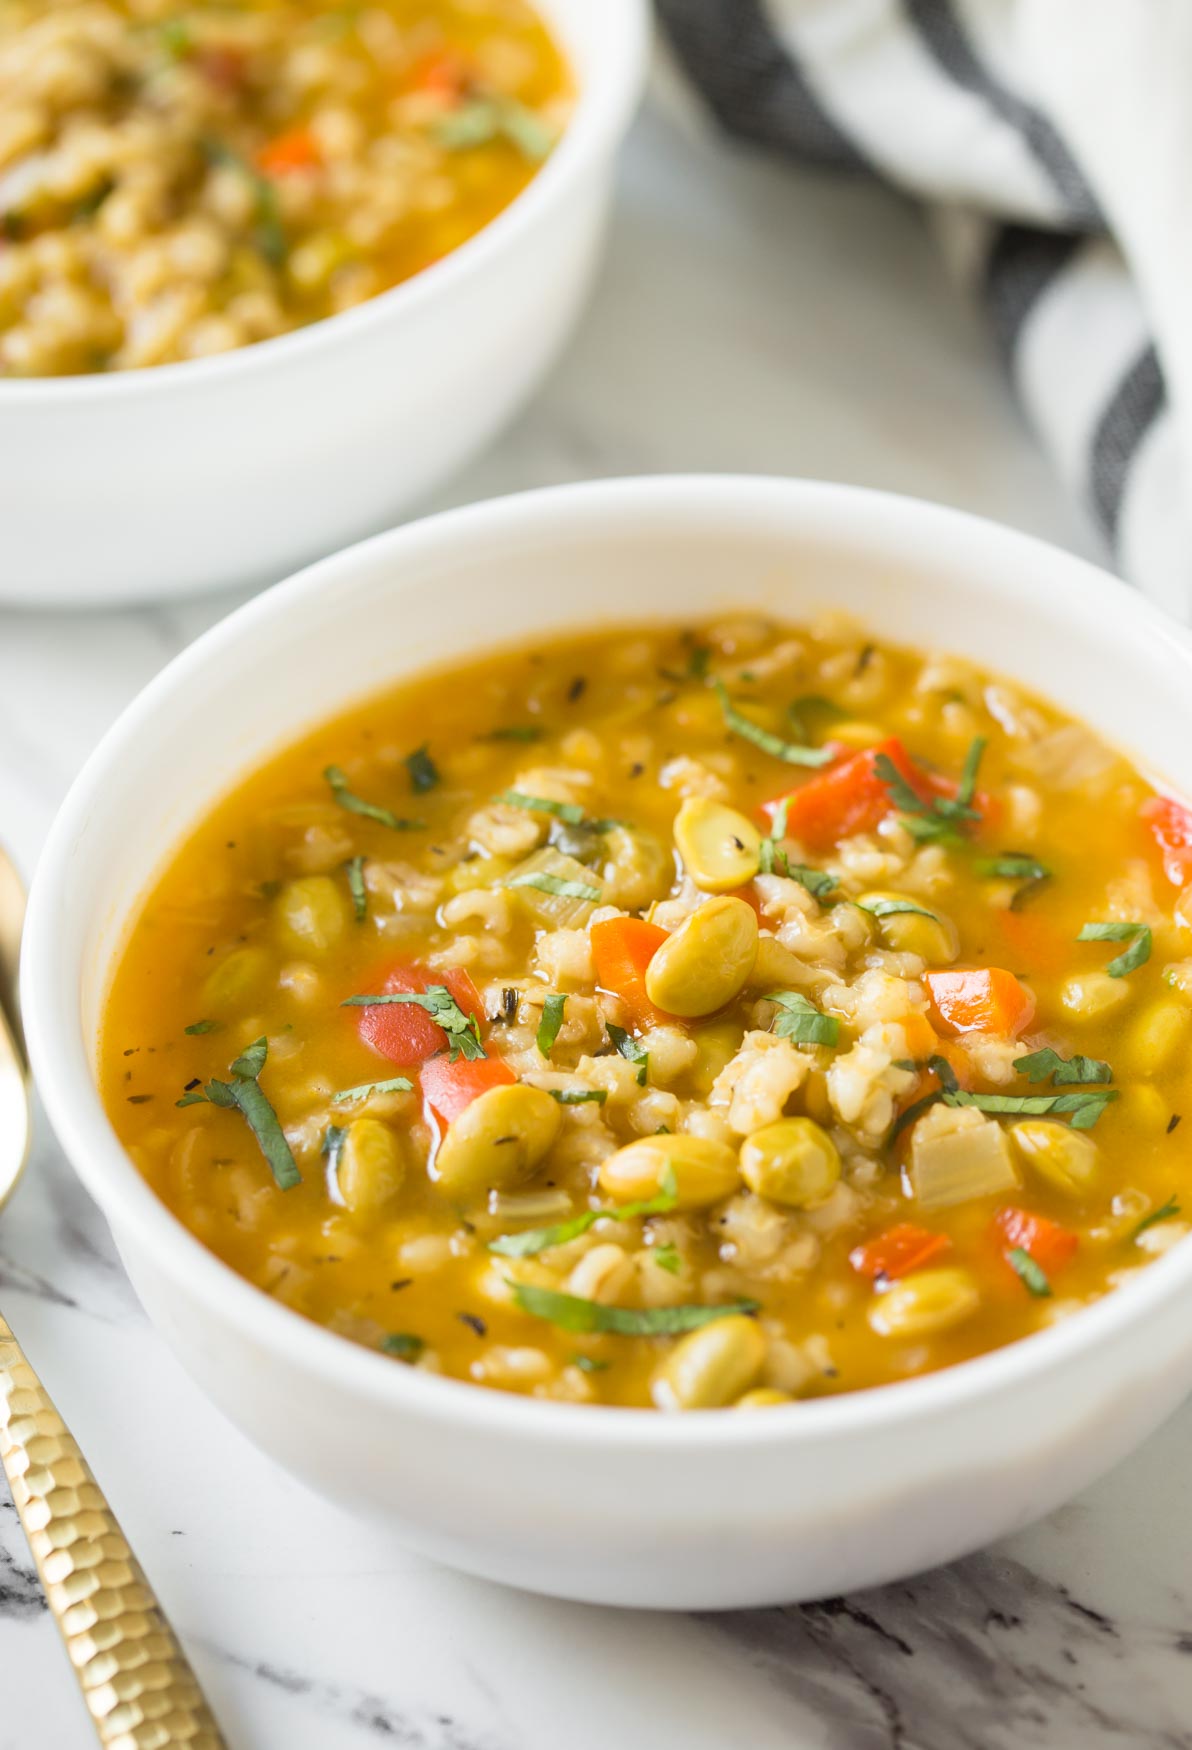 This Instant Vegetable Barley Soup is a quick and easy recipe for a healthy and nutritious soup. Full of flavors and takes about 30-40 minutes to prepare. And a perfect vegetable soup for weeknight dinners. | # watchwhatueat # barley #barleysoup #vegan #instantpotsoup